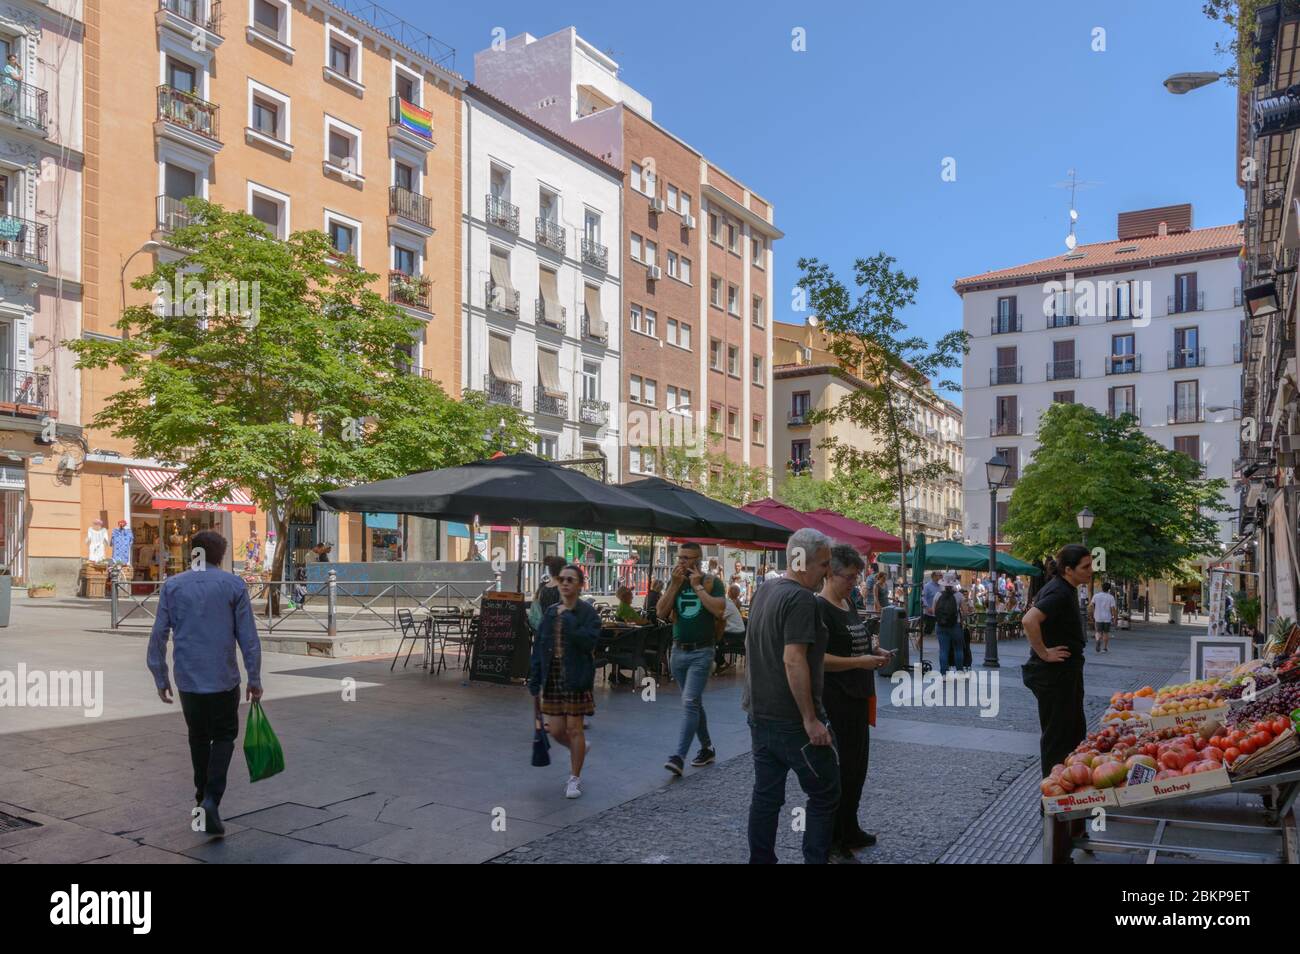 Castiza Chueca Square with its terraces of bars and shops cradle of gay pride in Madrid. June 15, 2019. Madrid. Spain. Travel Tourism Holidays Stock Photo